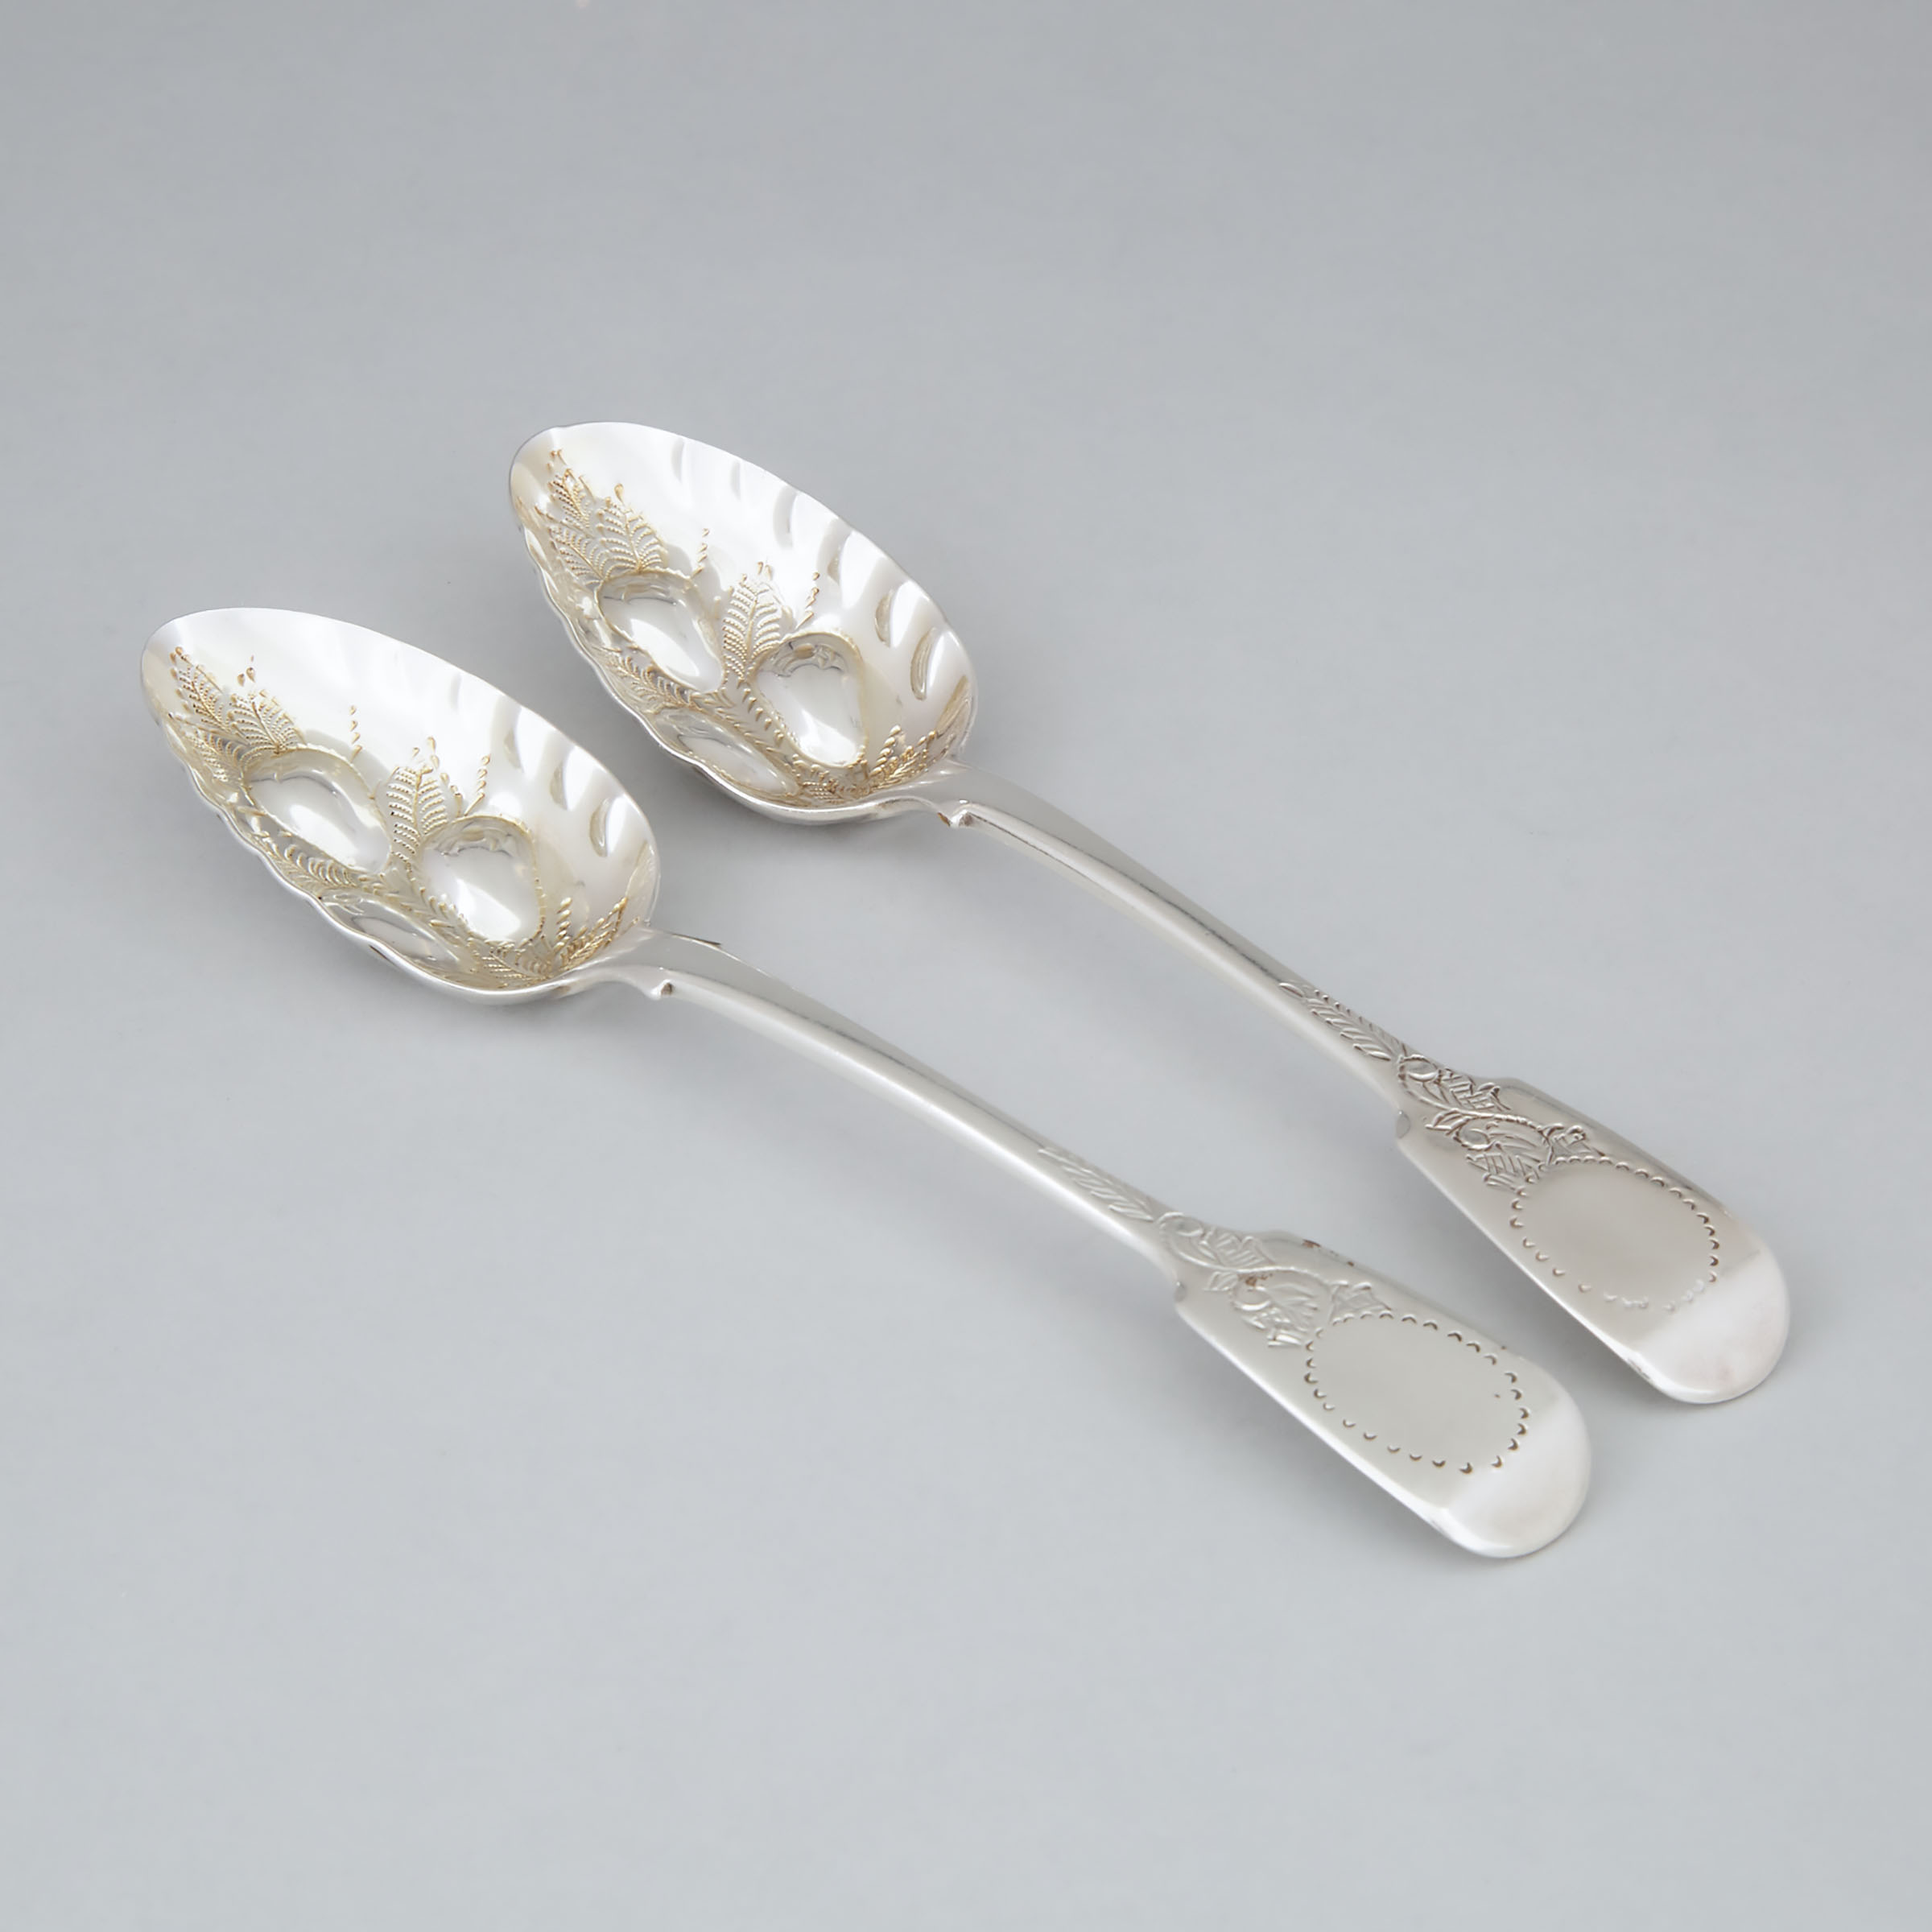 Pair of George IV Silver Fiddle Pattern Berry Spoons, William Chawner II, London, 1825